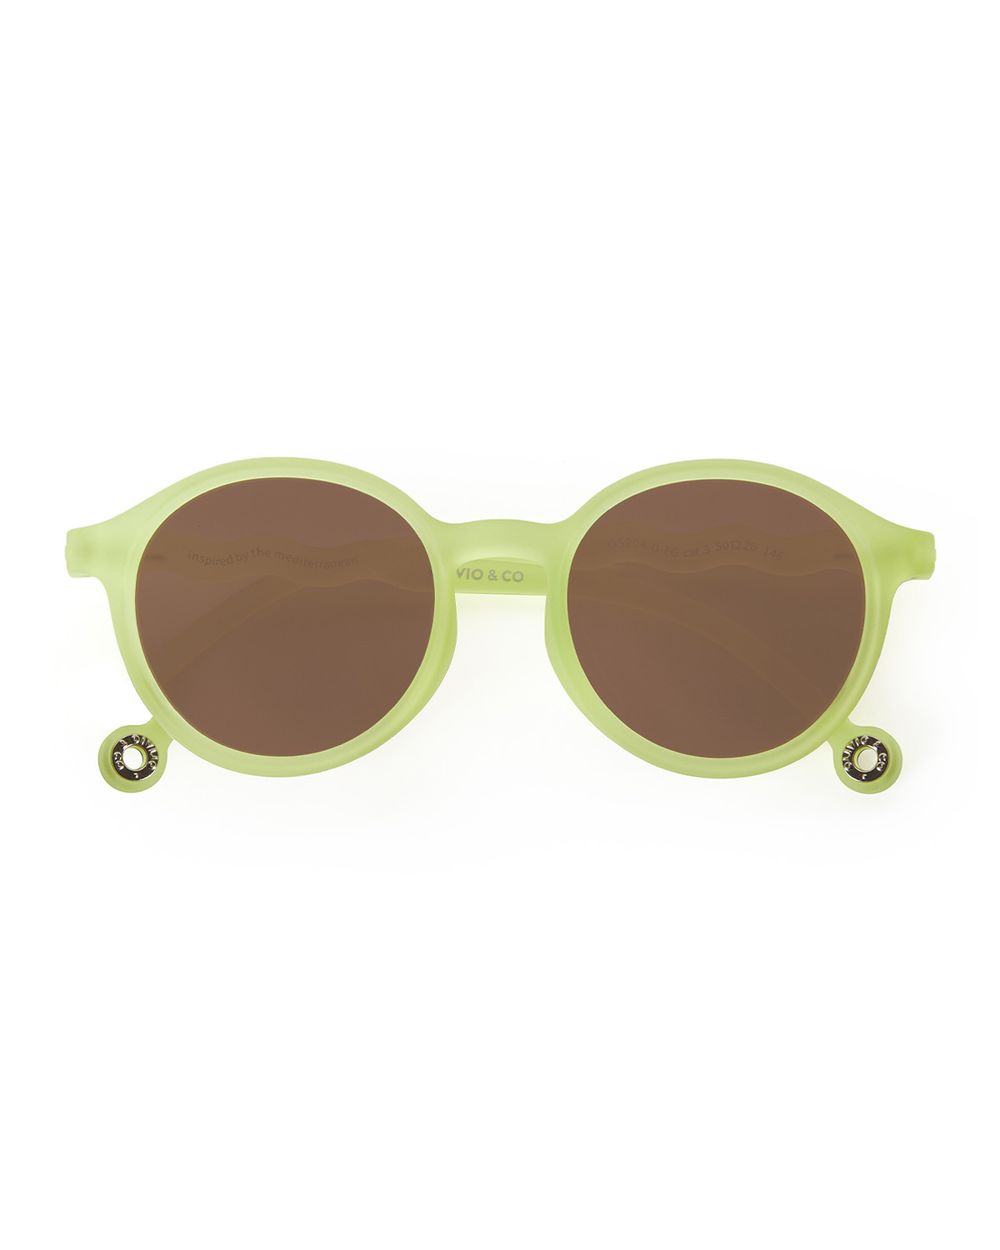 Adult Oval Sunglasses Lime Green